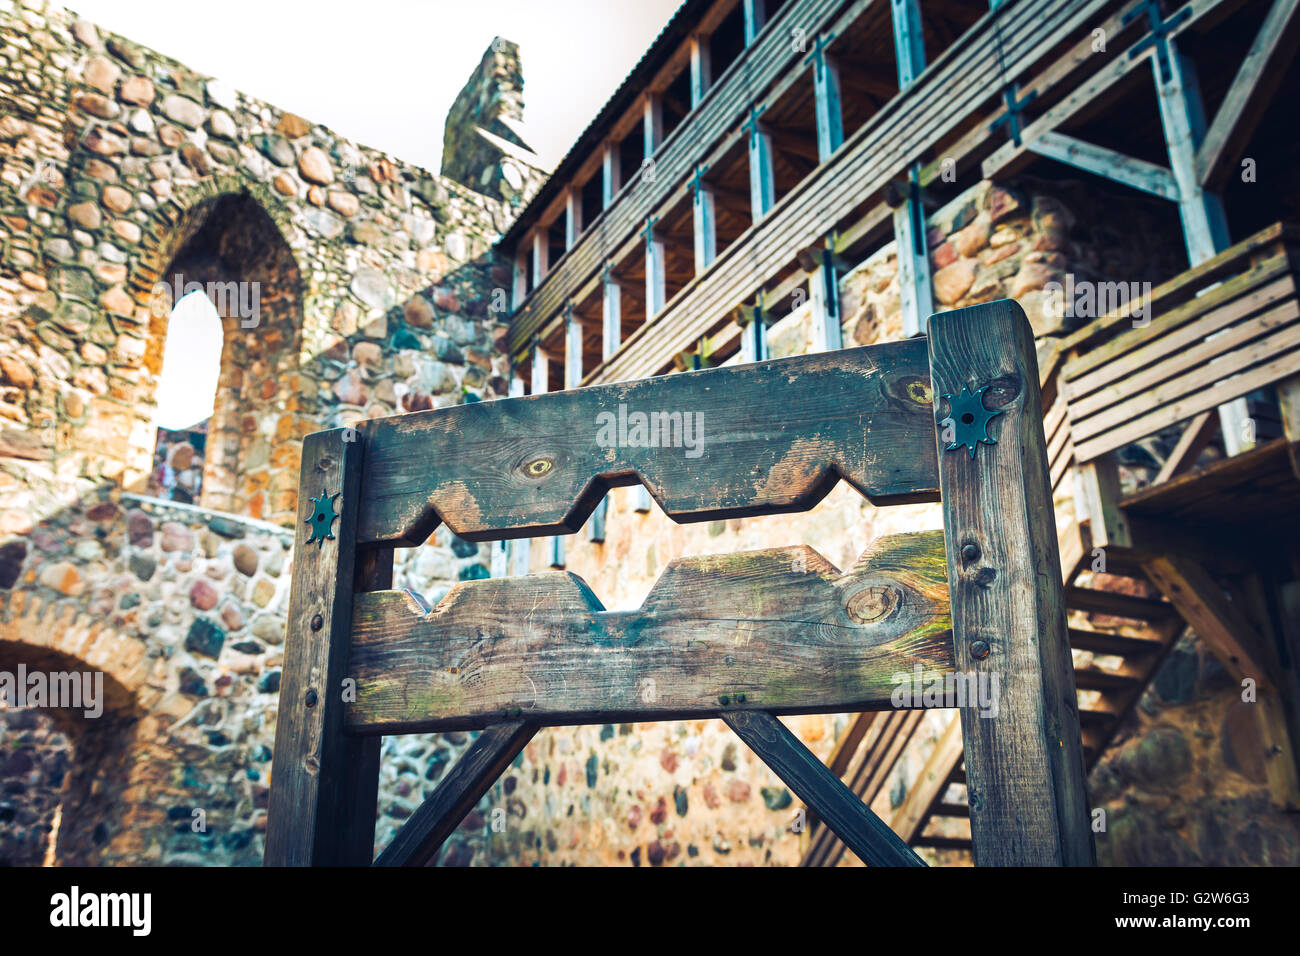 Wooden medieval torture device, ancient pillory in old castle. Stock Photo